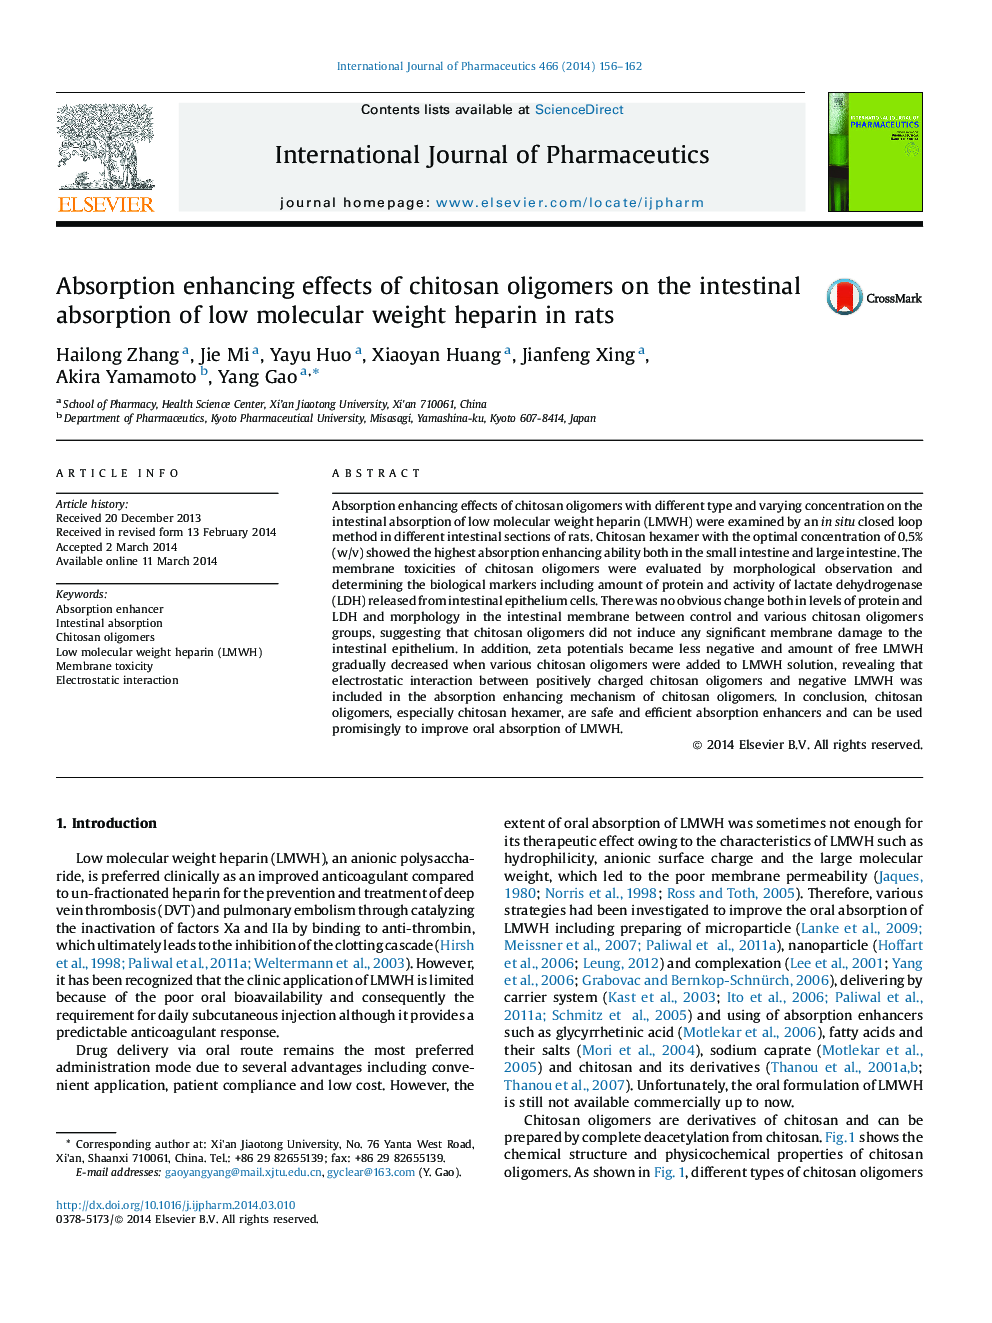 Absorption enhancing effects of chitosan oligomers on the intestinal absorption of low molecular weight heparin in rats